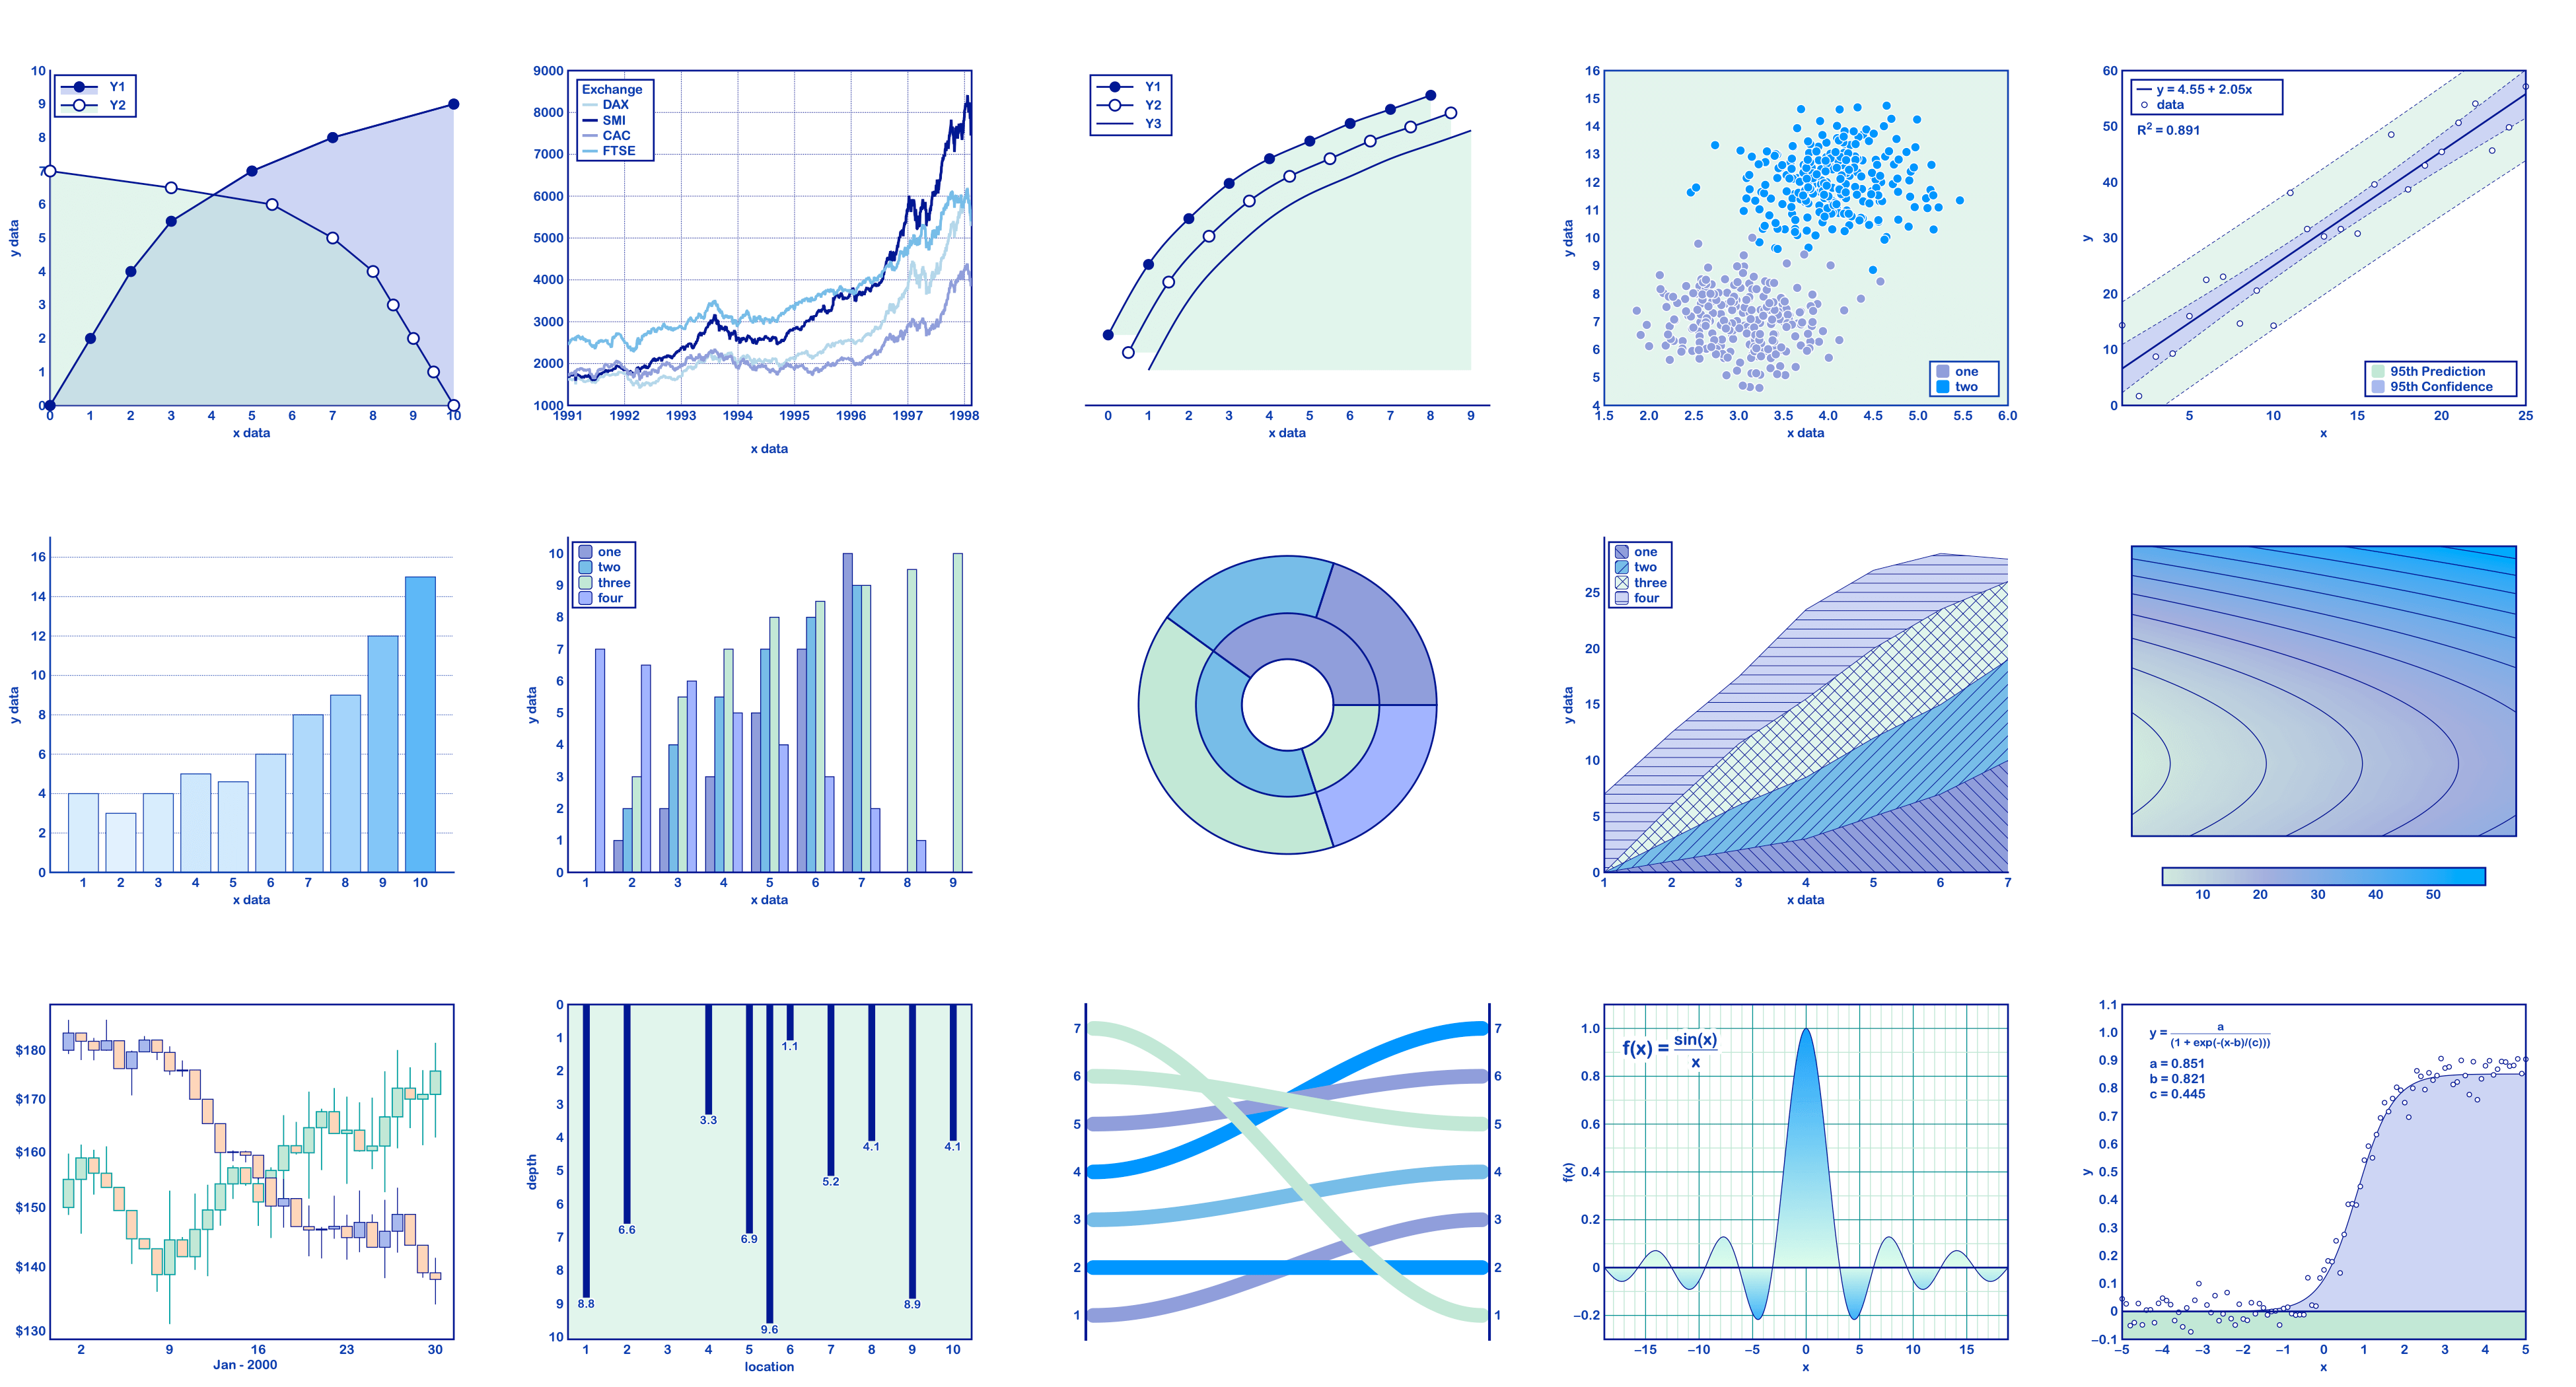 Examples of DataGraph graphs